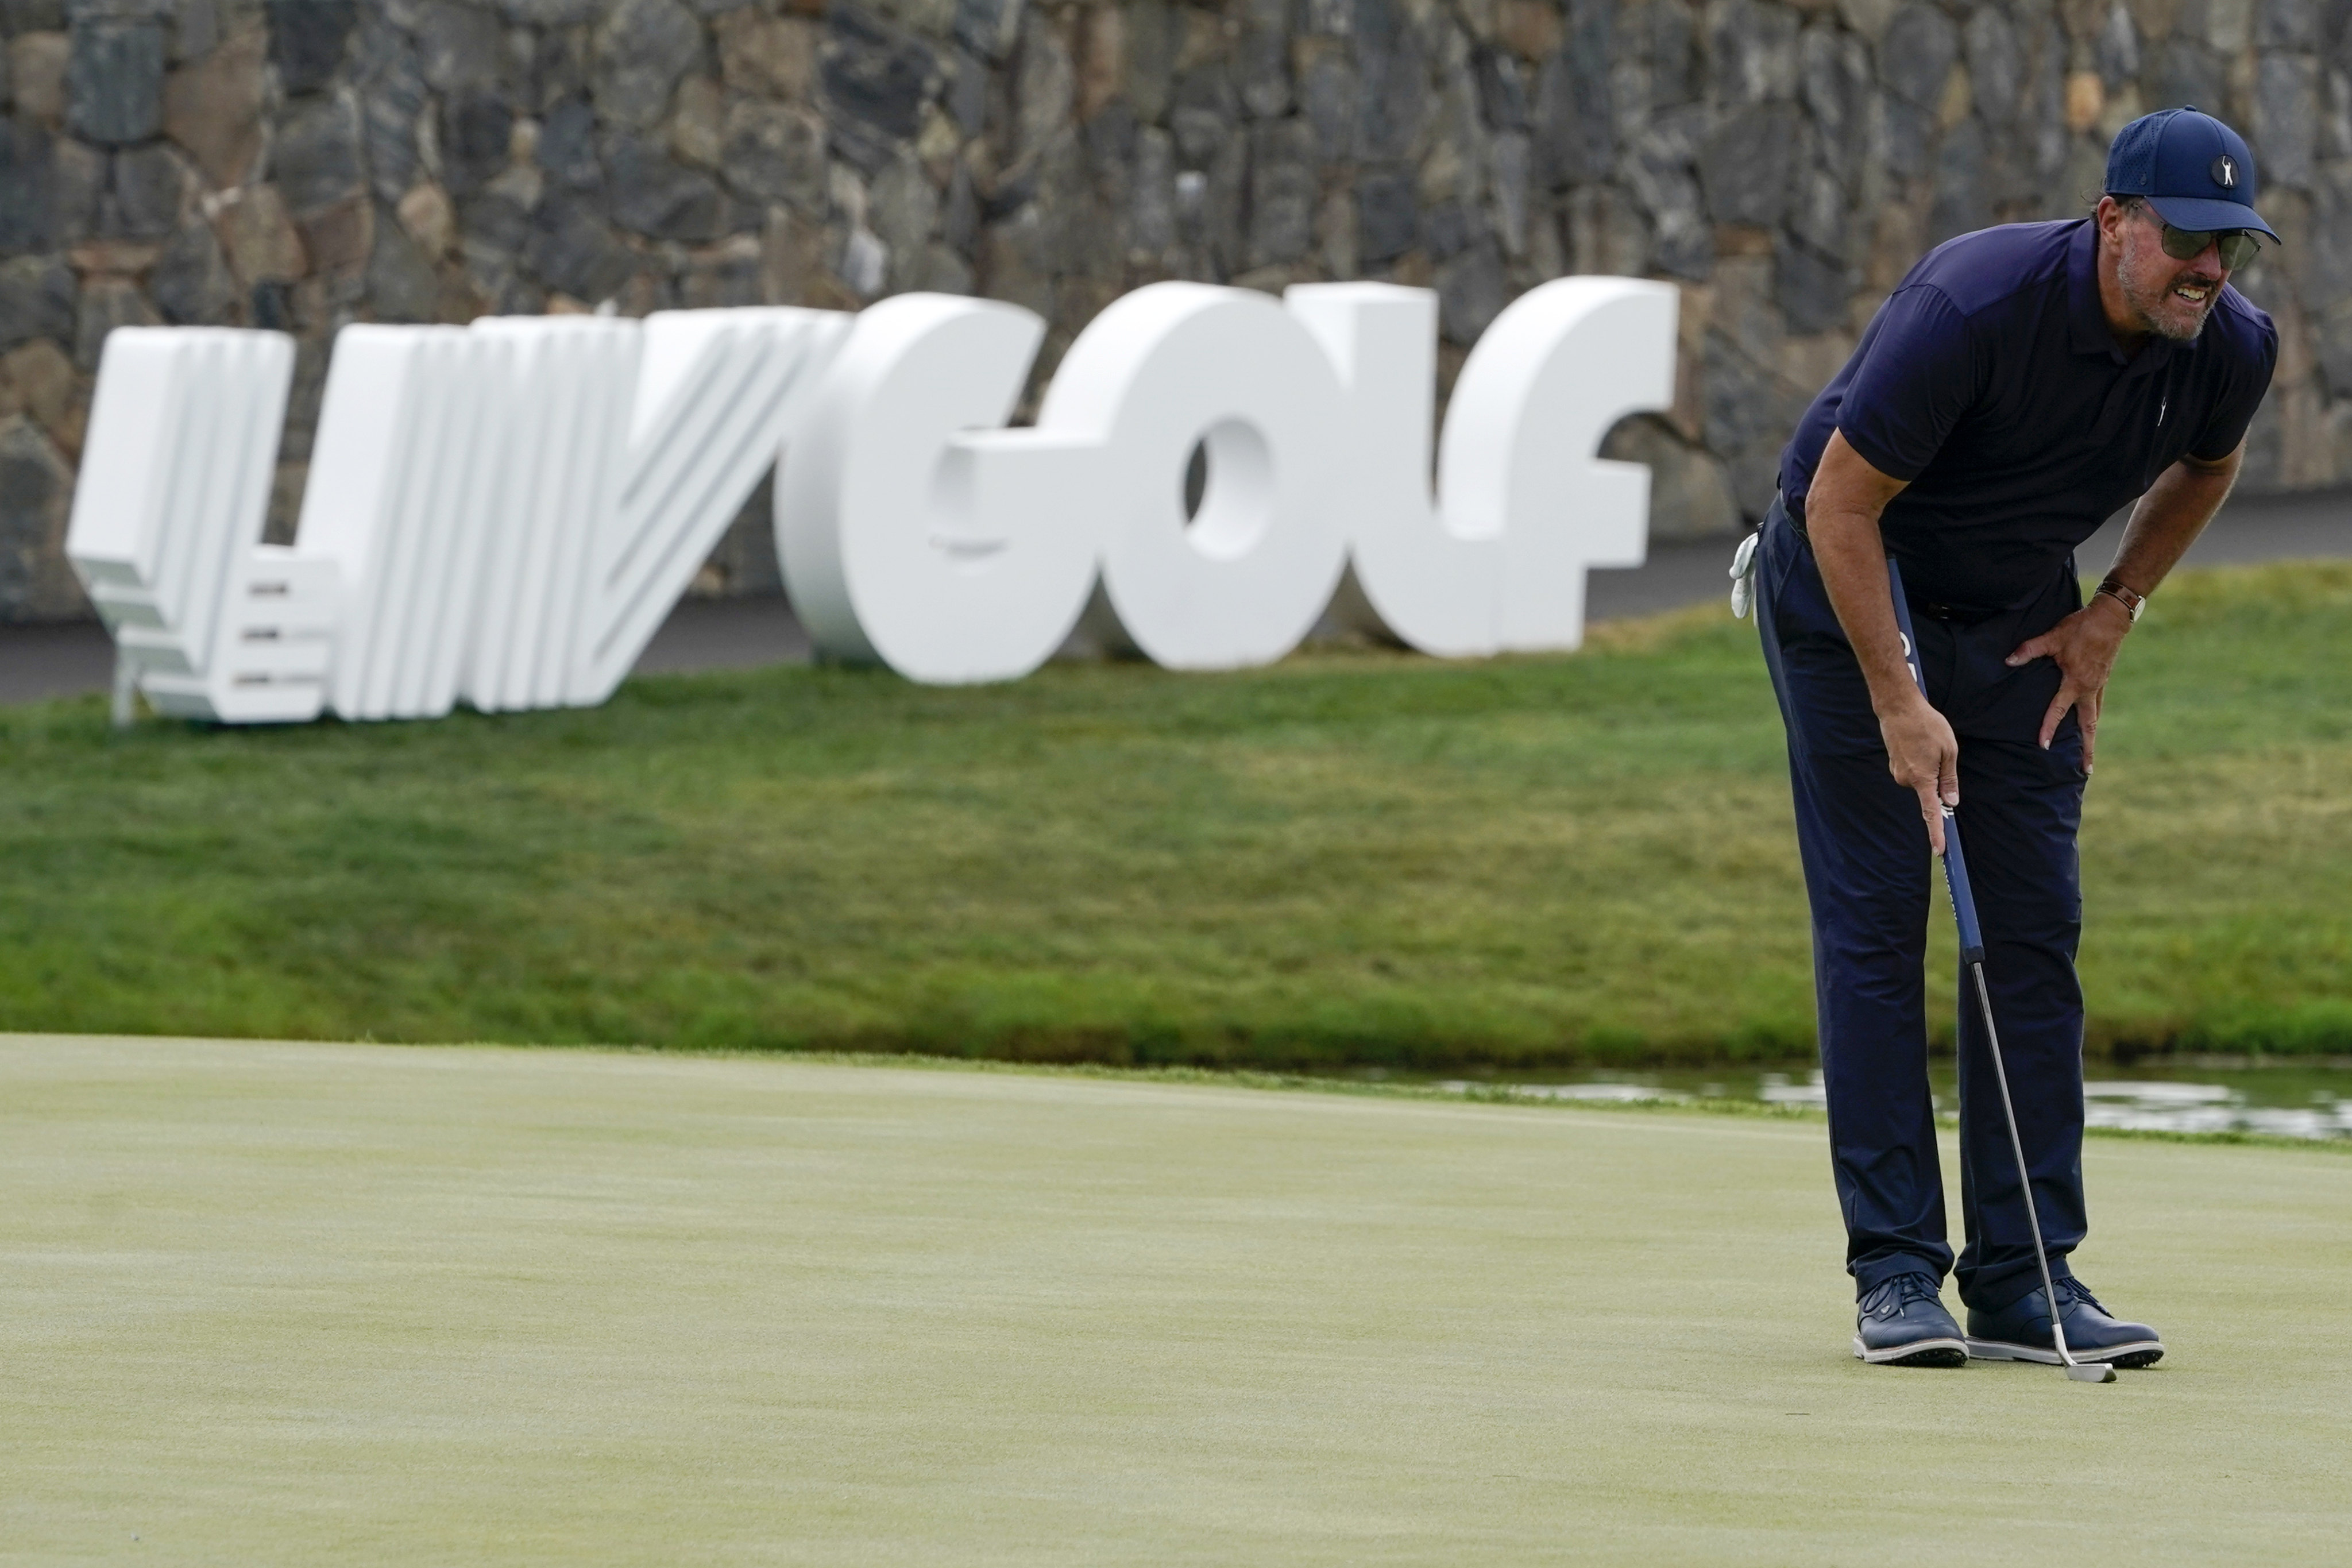 Phil Mickelson lines up a shot during the first round of the Bedminster Invitational LIV Golf tournament. Photo: AP